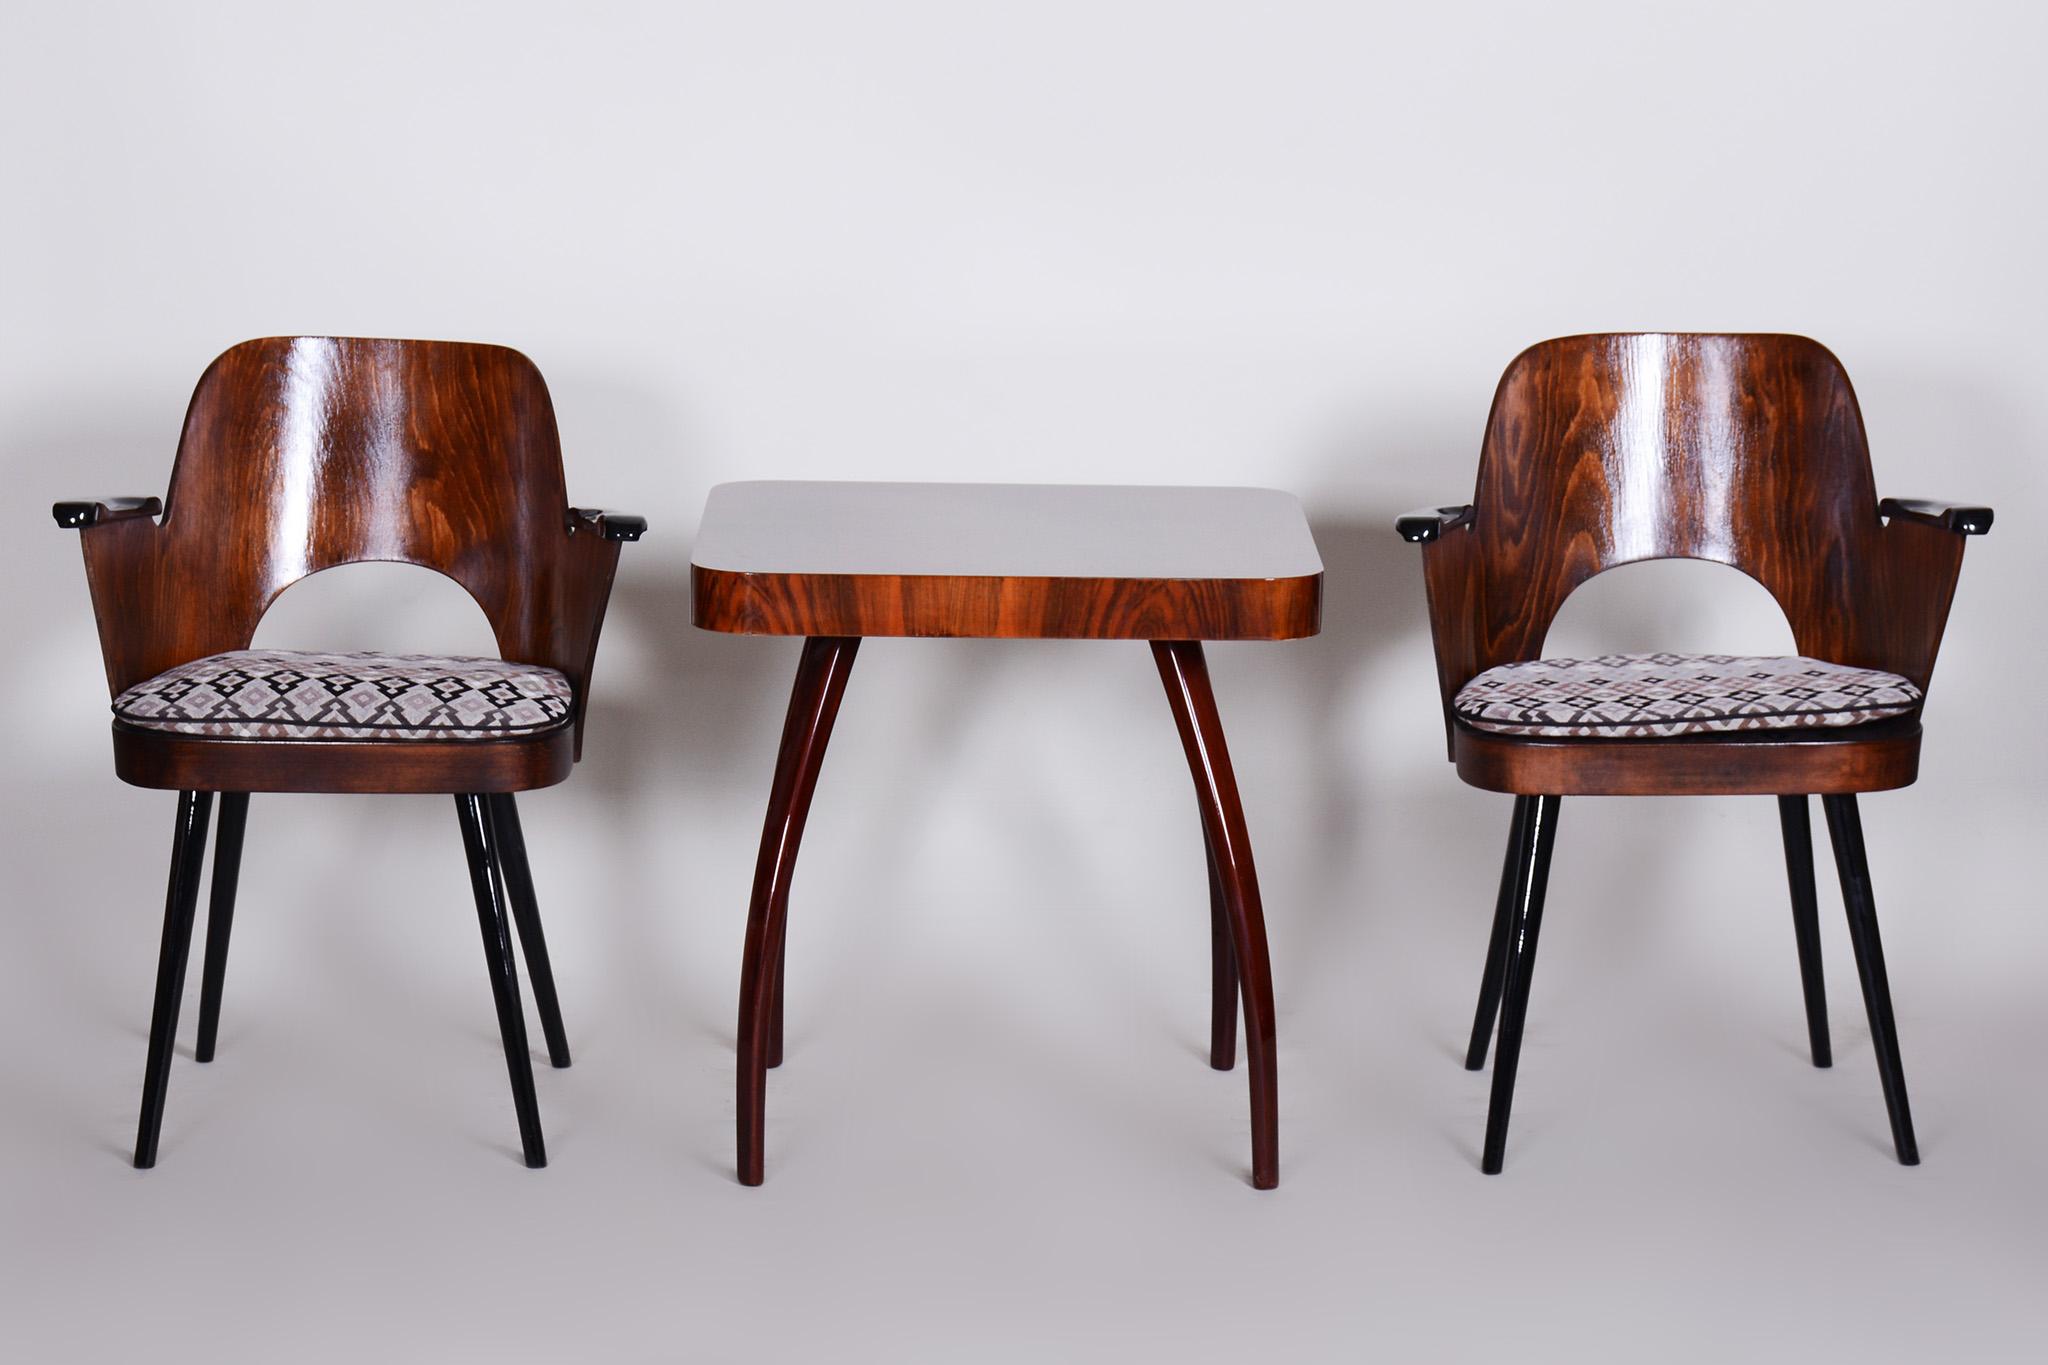 Restored Pair of midcentury armchairs by Oswald Heardtl.

Source: Czechia
Period: 1950-1950
Material: Beech, Fabric

New polish and professional upholstery.